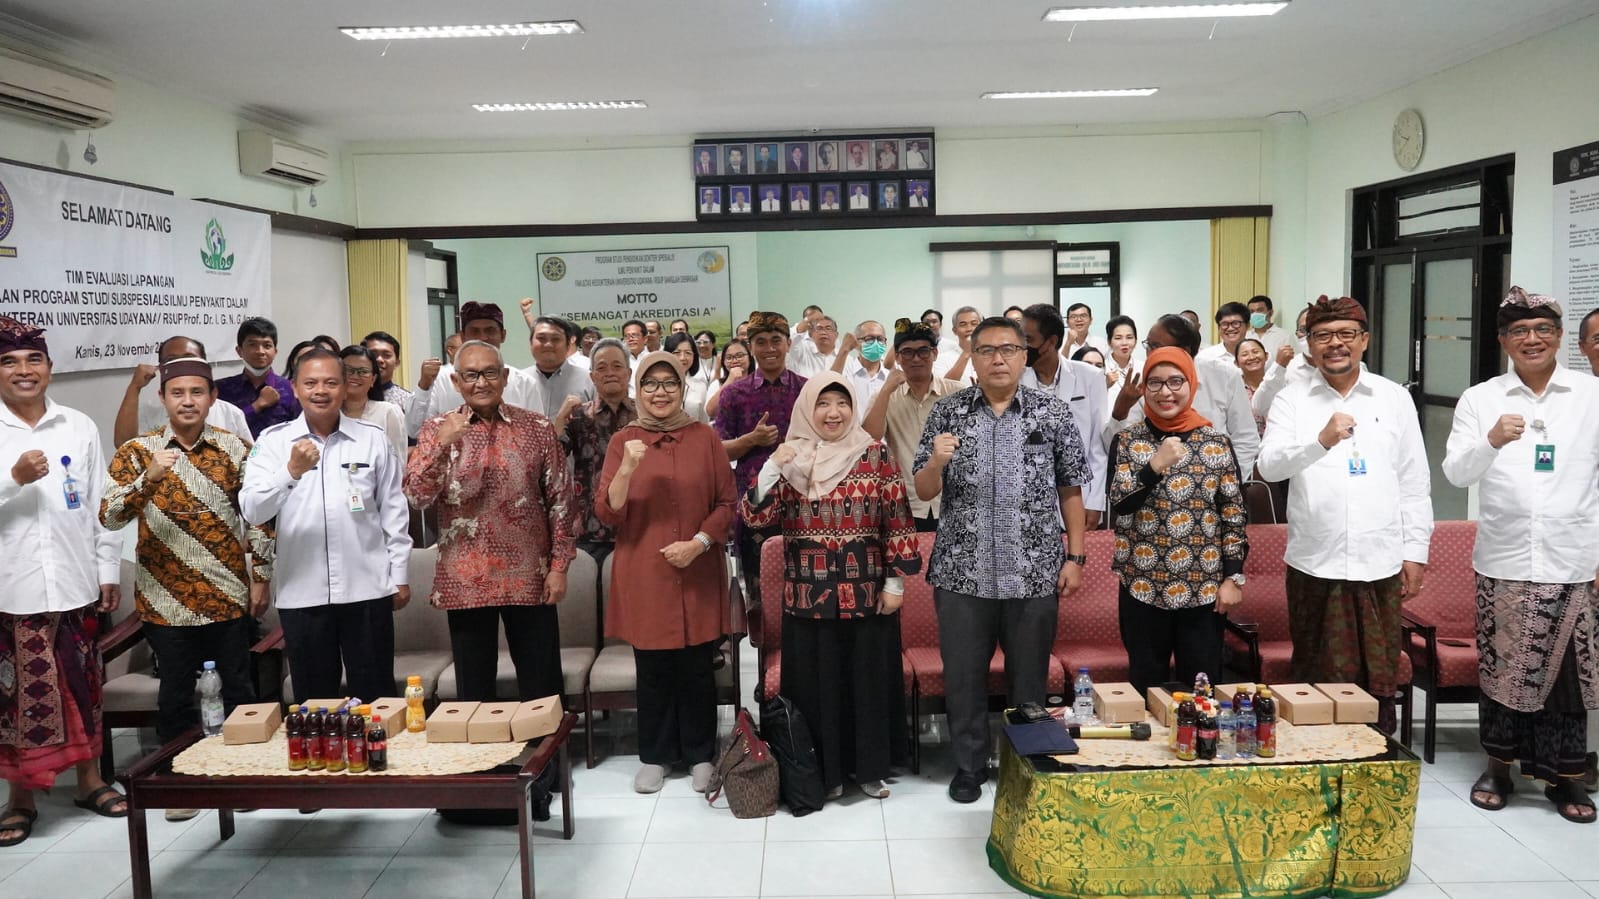 Visit of the Evaluation Team for Proposed Implementation of the Internal Medicine Subspecialty Study Program at Udayana University